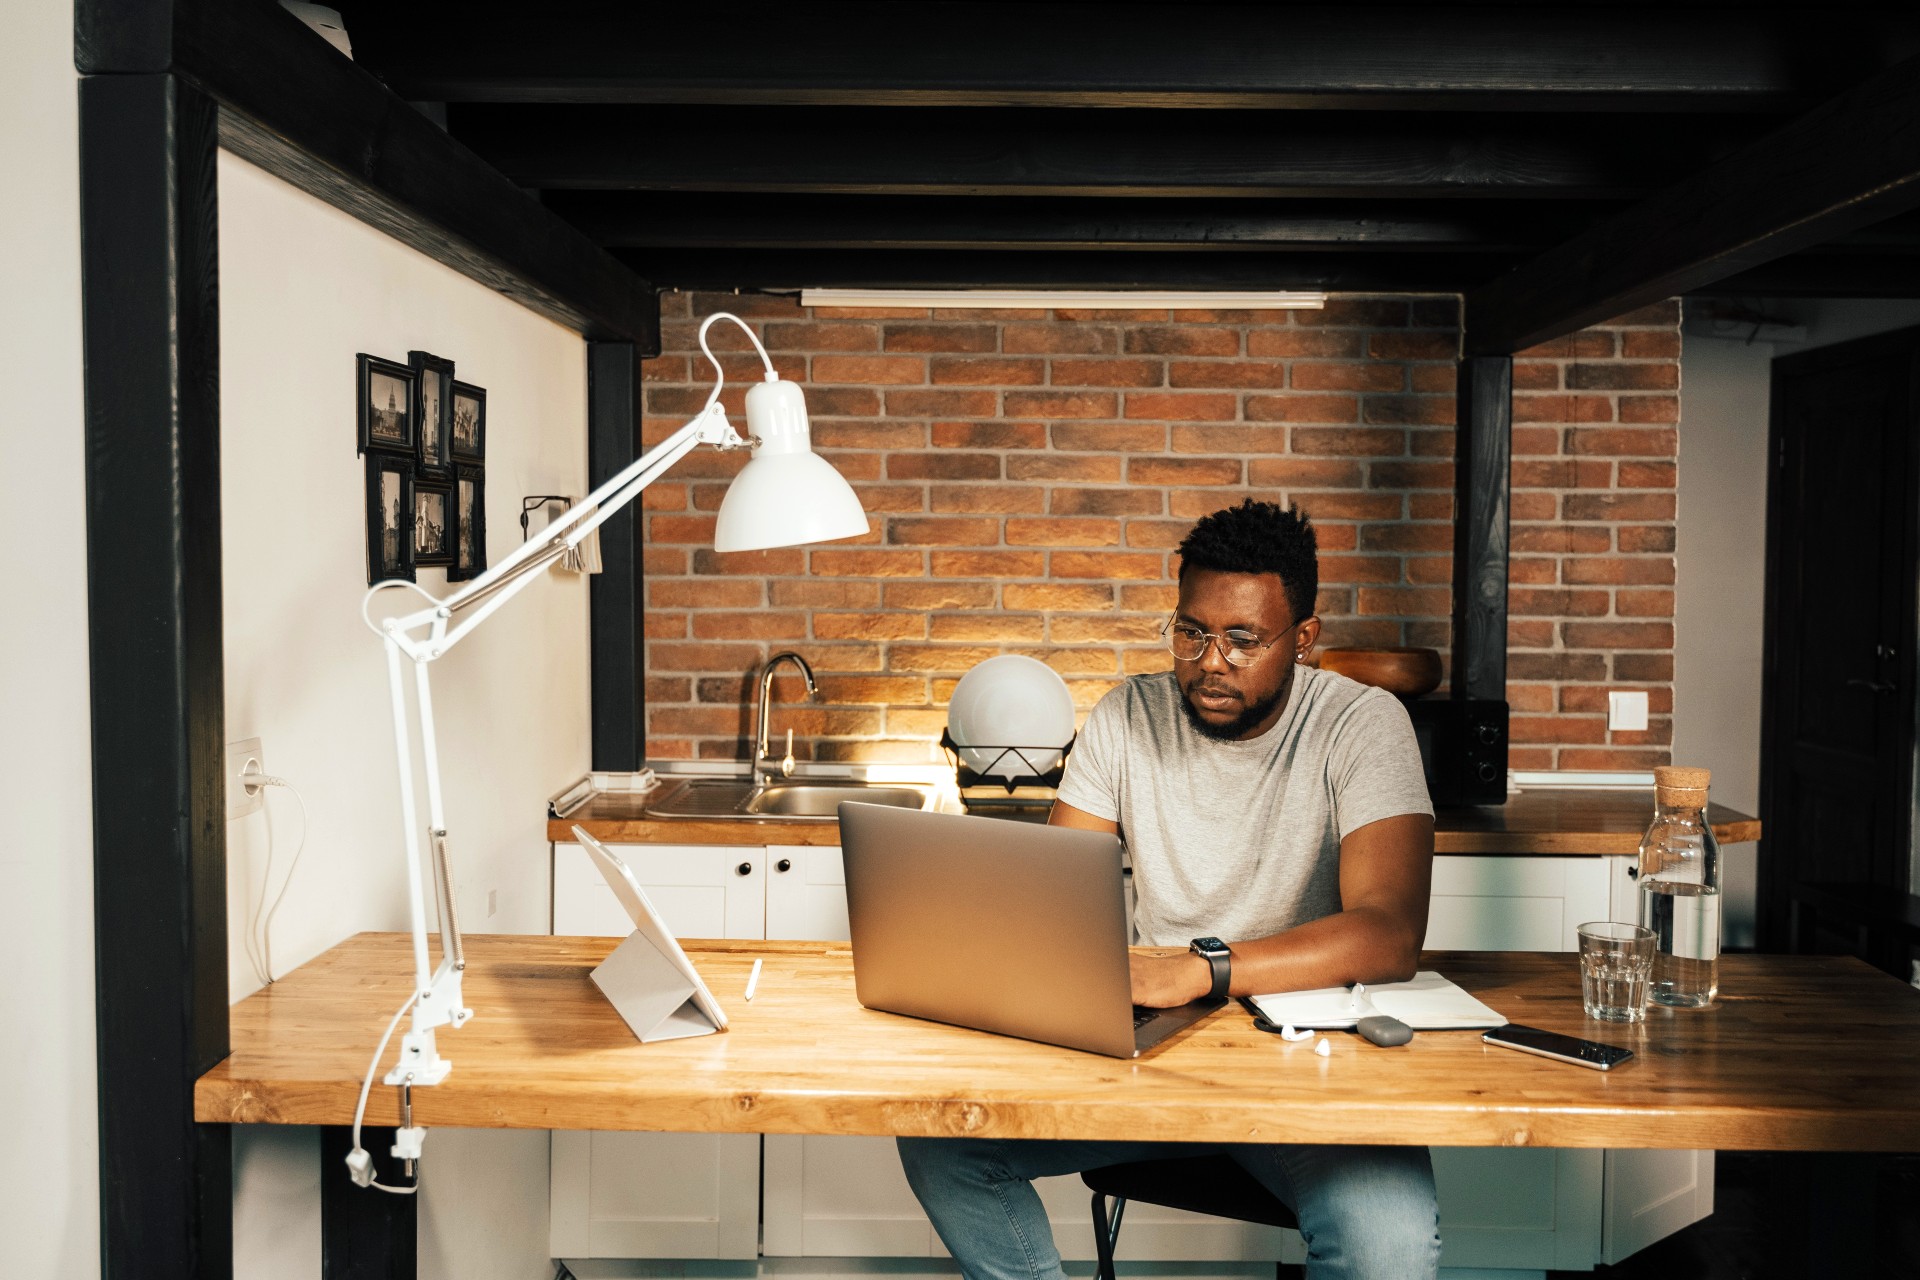 Working from home definitely has its perks, but you'll want to keep your productivity level consistent. These eight simple tips can help!